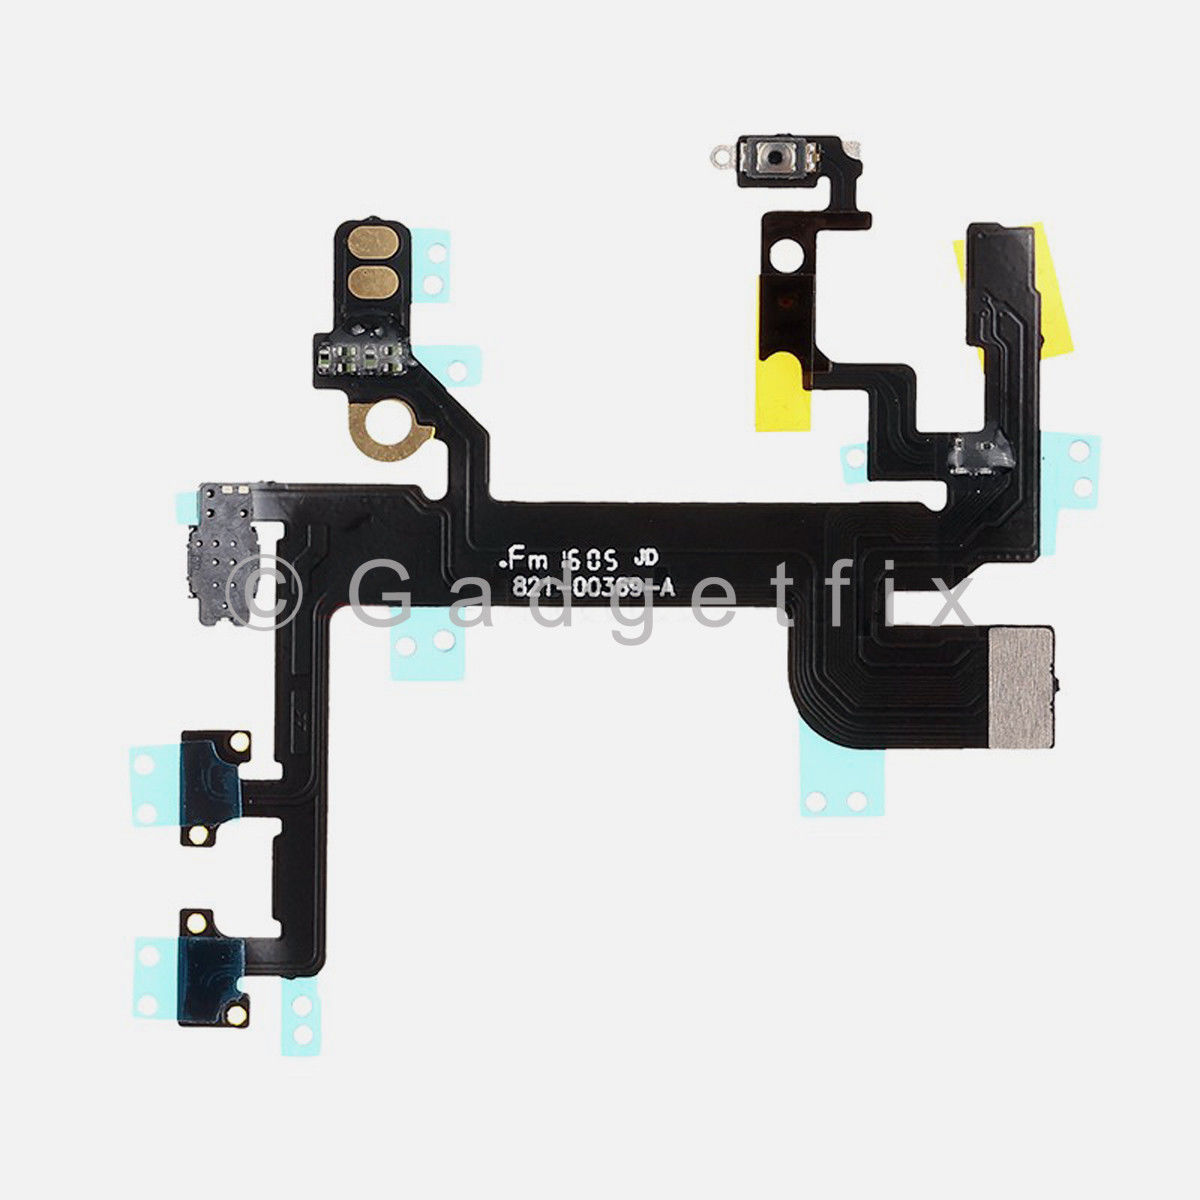 US iPhone SE Main Power Button + Volume + Mute Connector Flex Ribbon Replacement